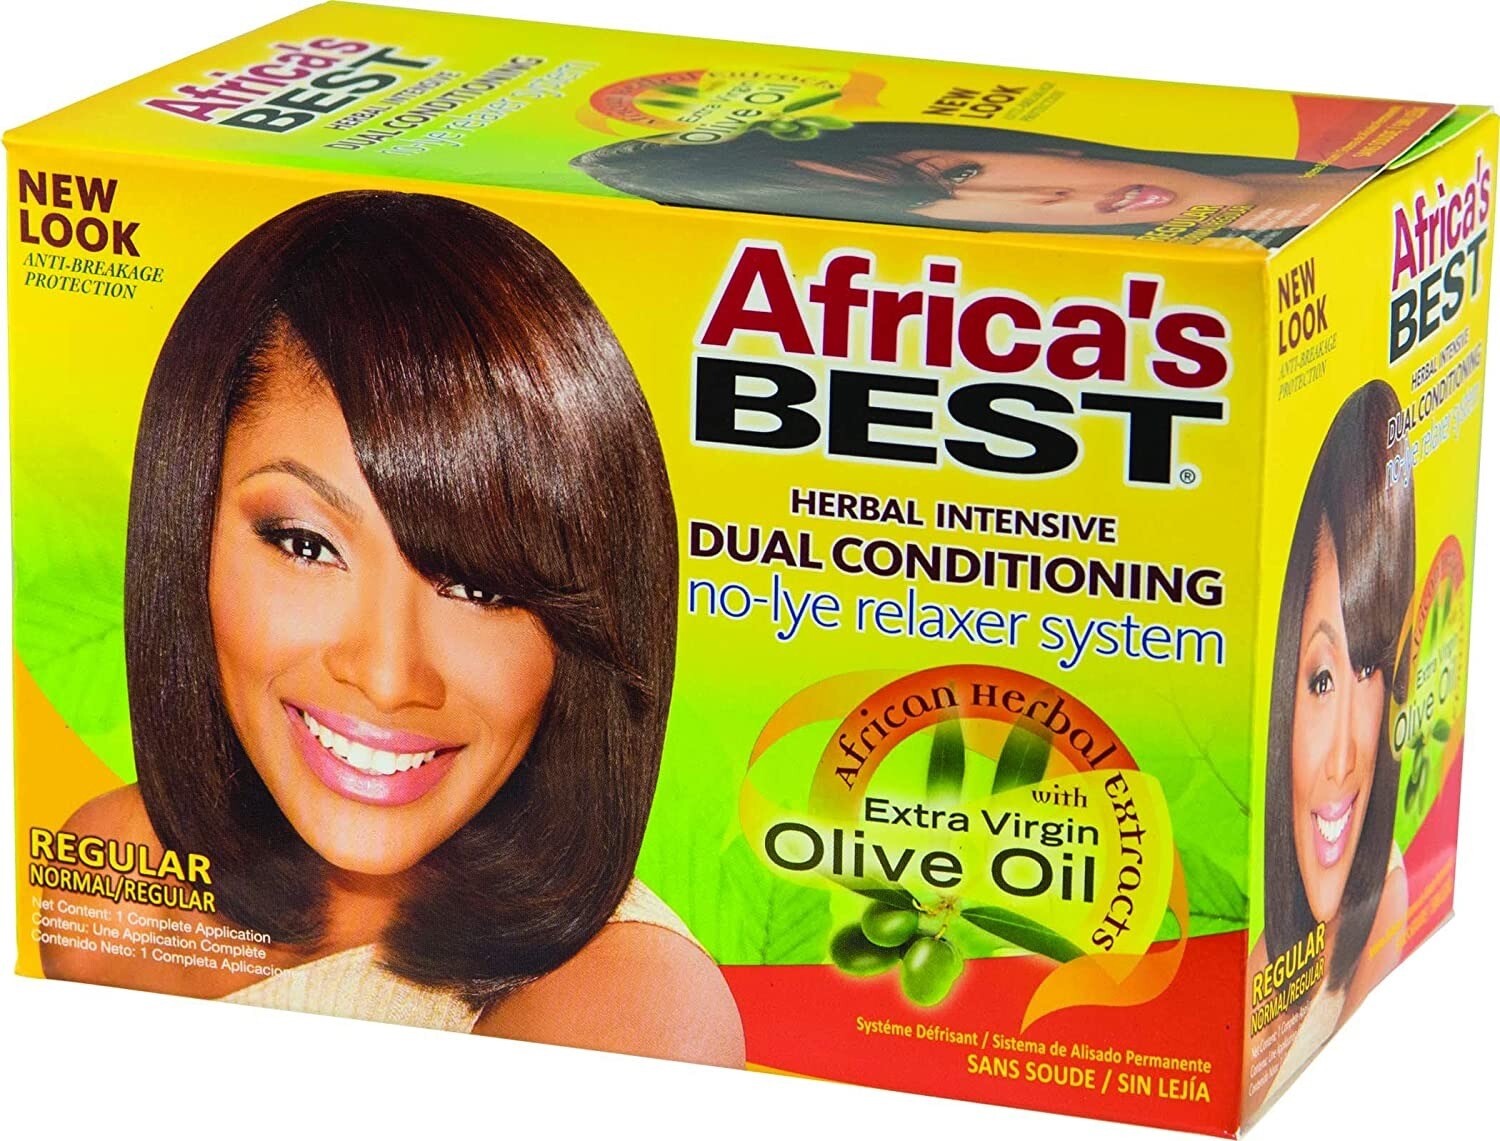 Africa’s Best Herbal Intensive Dual Conditioning No-lye Relaxer System- Regular